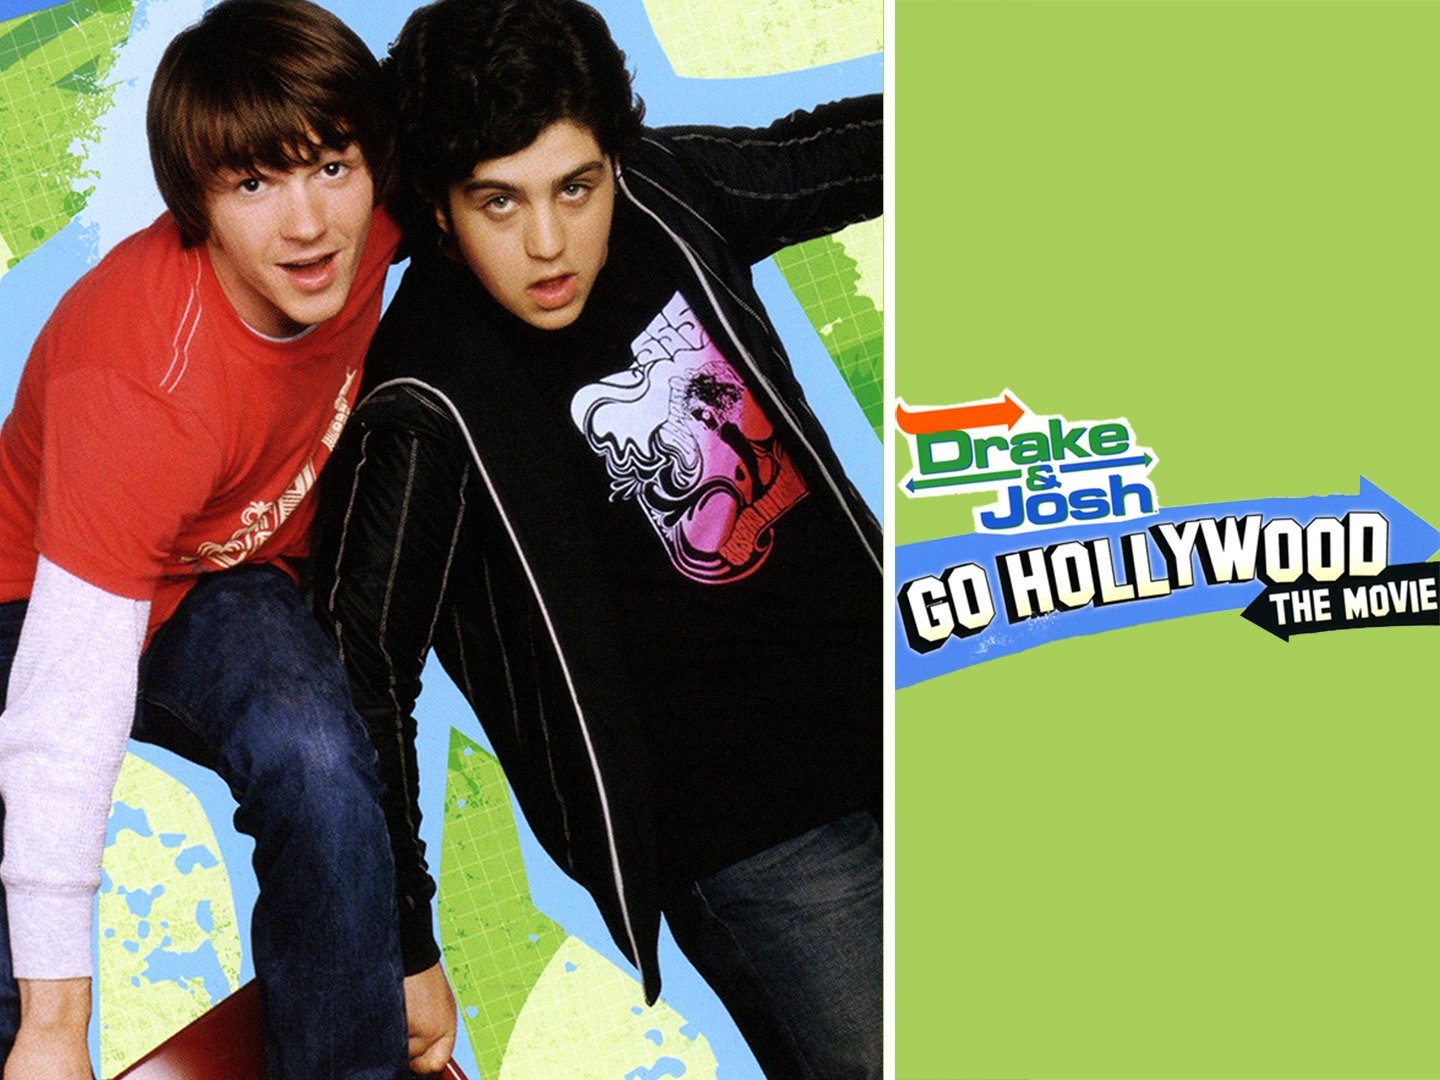 drake and josh complete series watch onlie